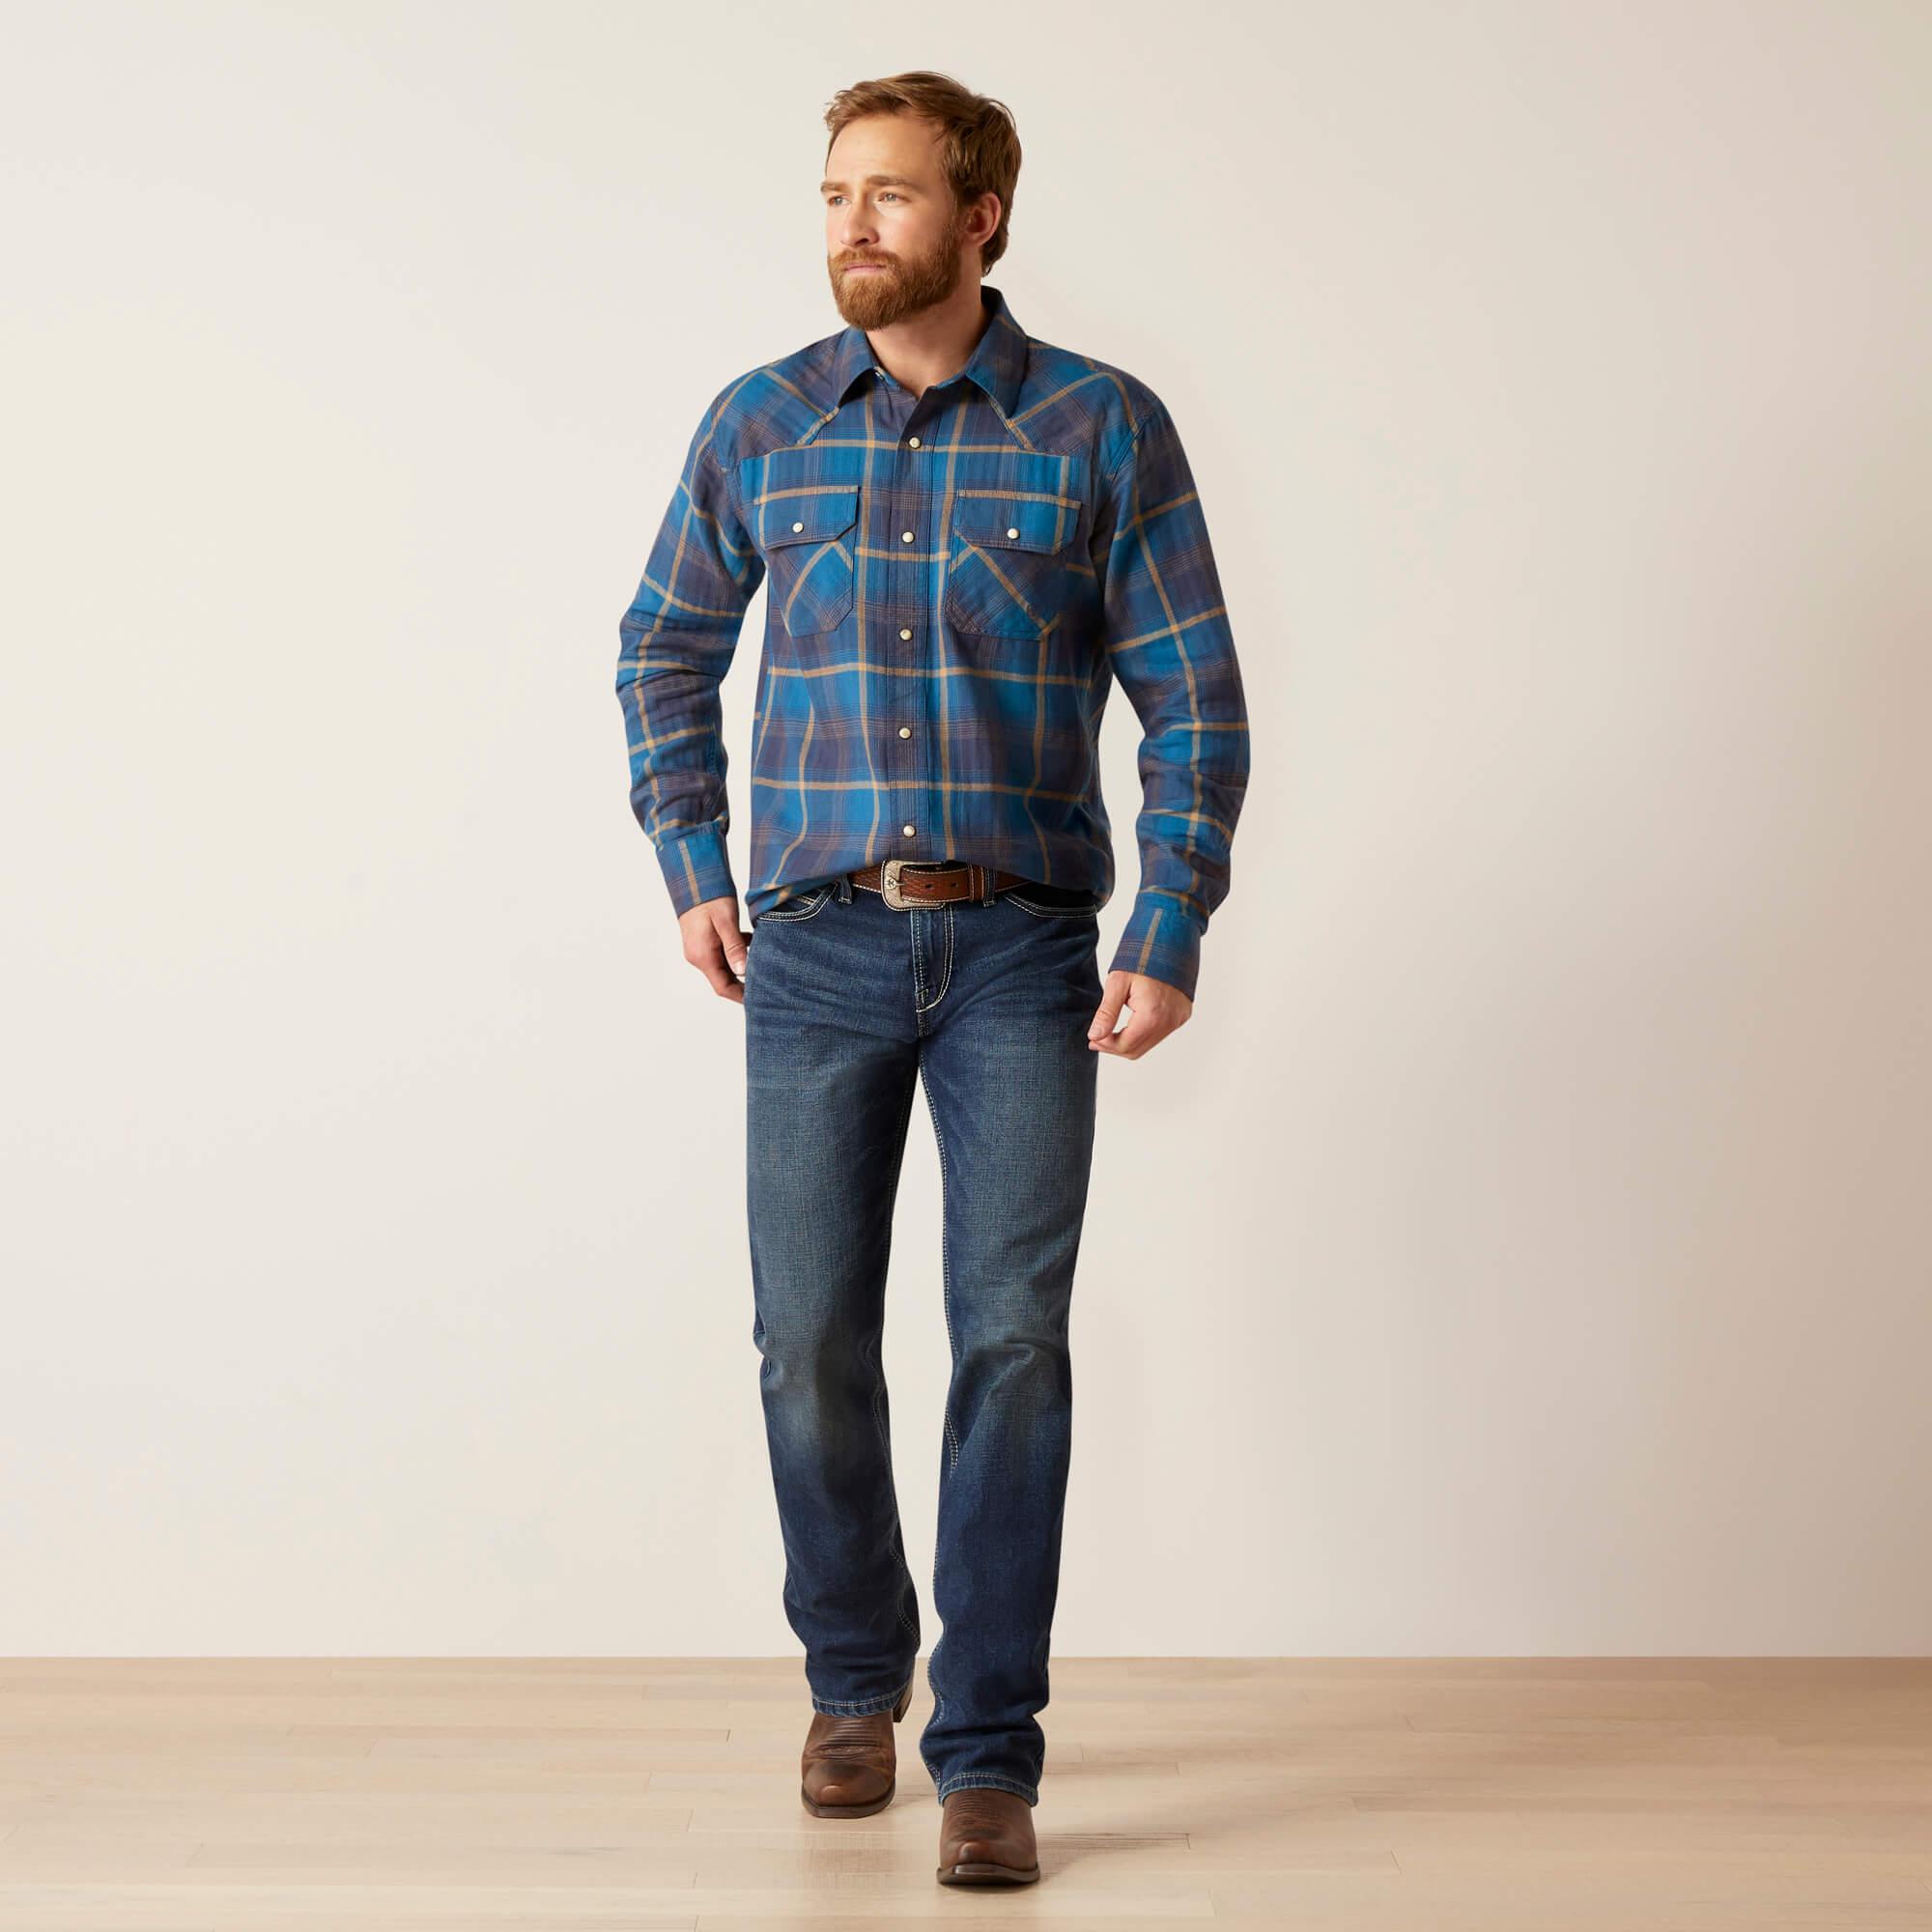 Harland Retro Fit Shirt - Moon Howl - Purpose-Built / Home of the Trades